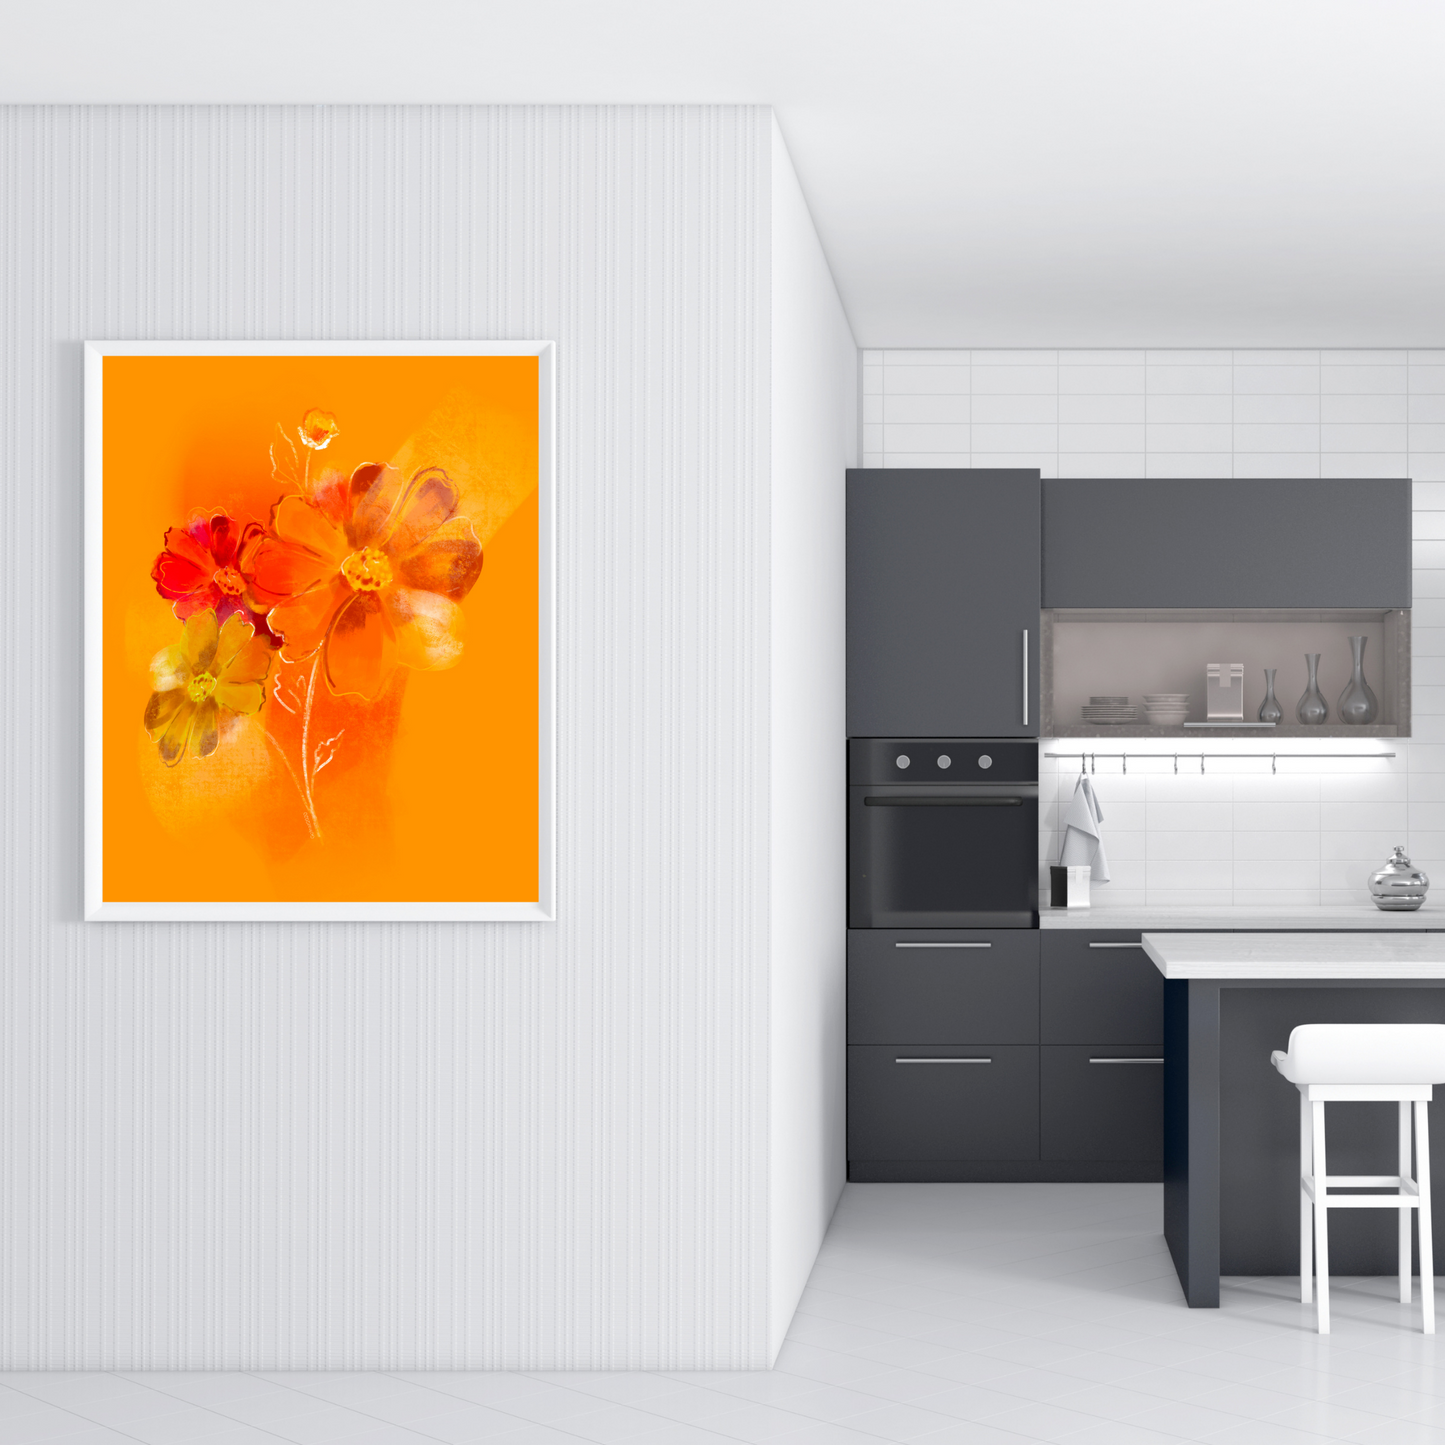 An example of the Chrysanthemum painting by ArisaTeam in a kitchen